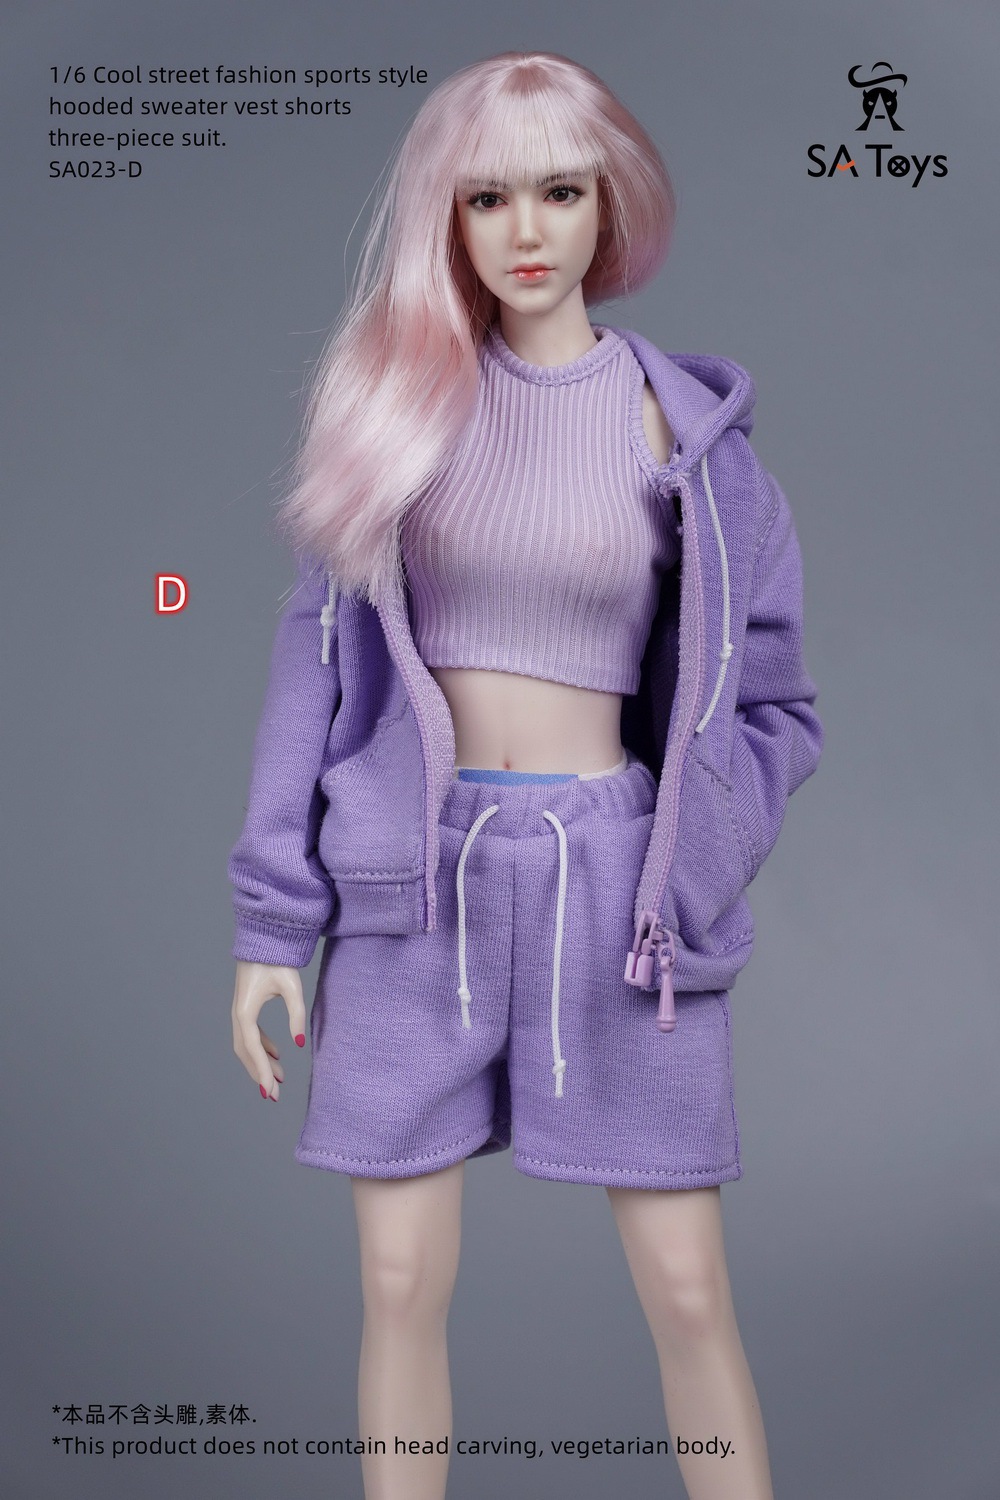 floralskirt - NEW PRODUCT: SA Toys: 1/6 hip skirt / floral elastic skirt / fashionable sports style hooded sweater cover, hip-hop fisherman hat halter and footwear casual pants [variety optional] 17020310